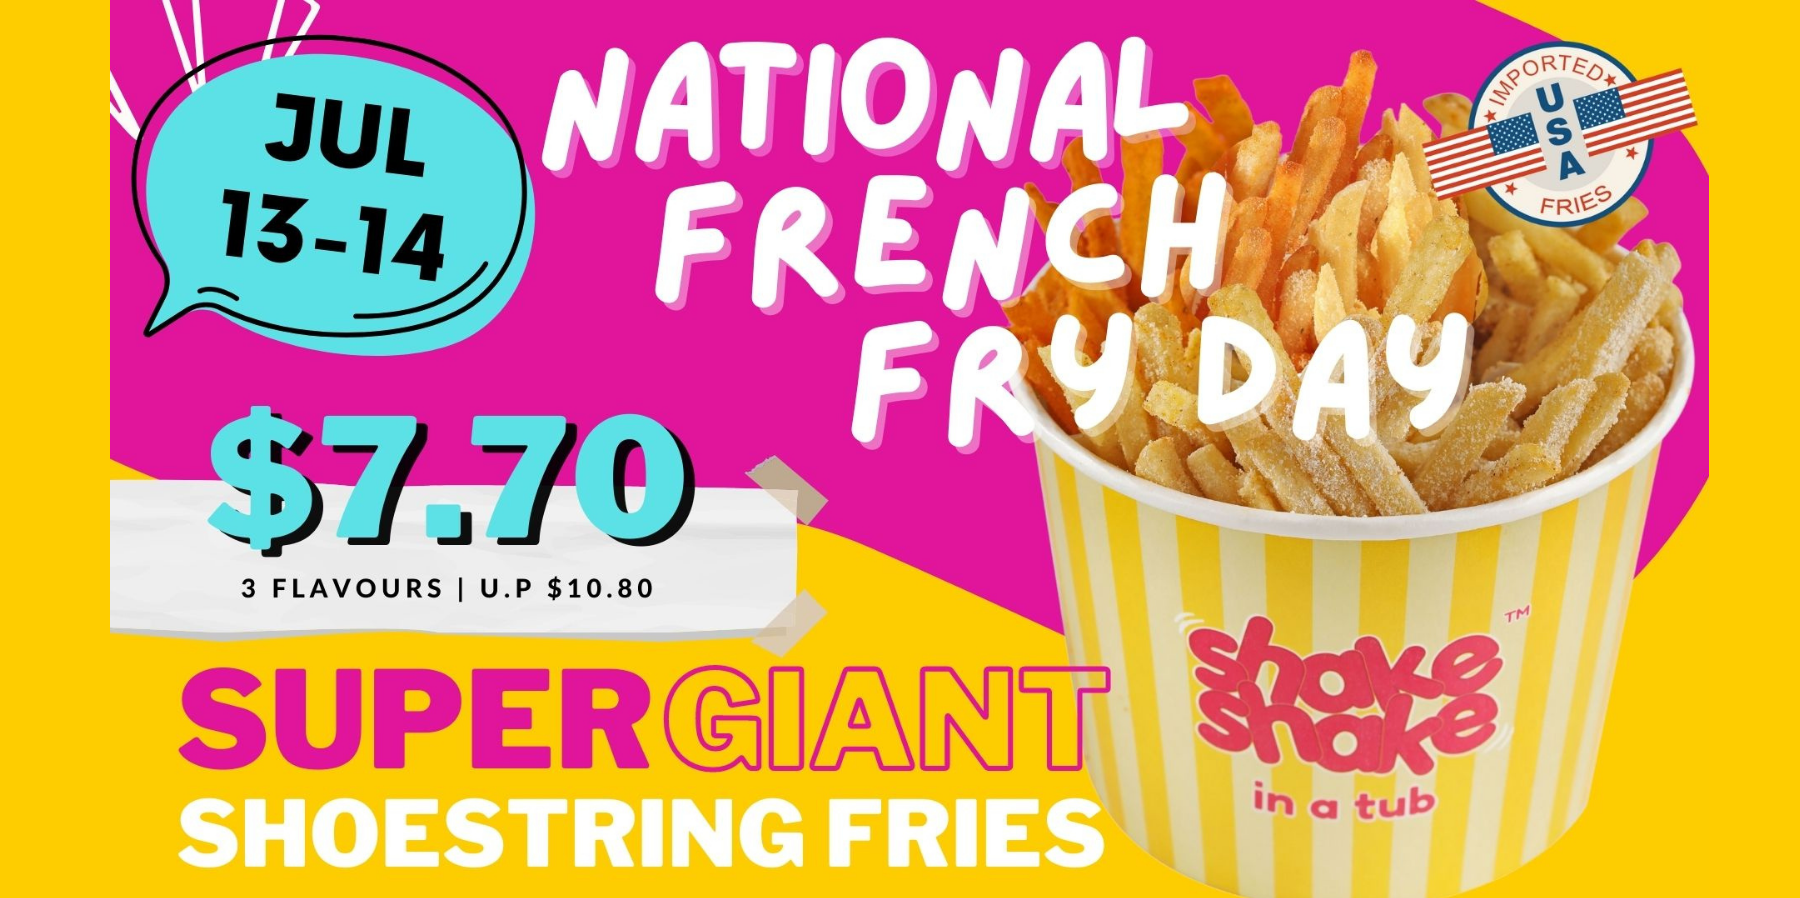 It’s a French Fries Frenzy with Shake Shake In A Tub this National French Fry Day!